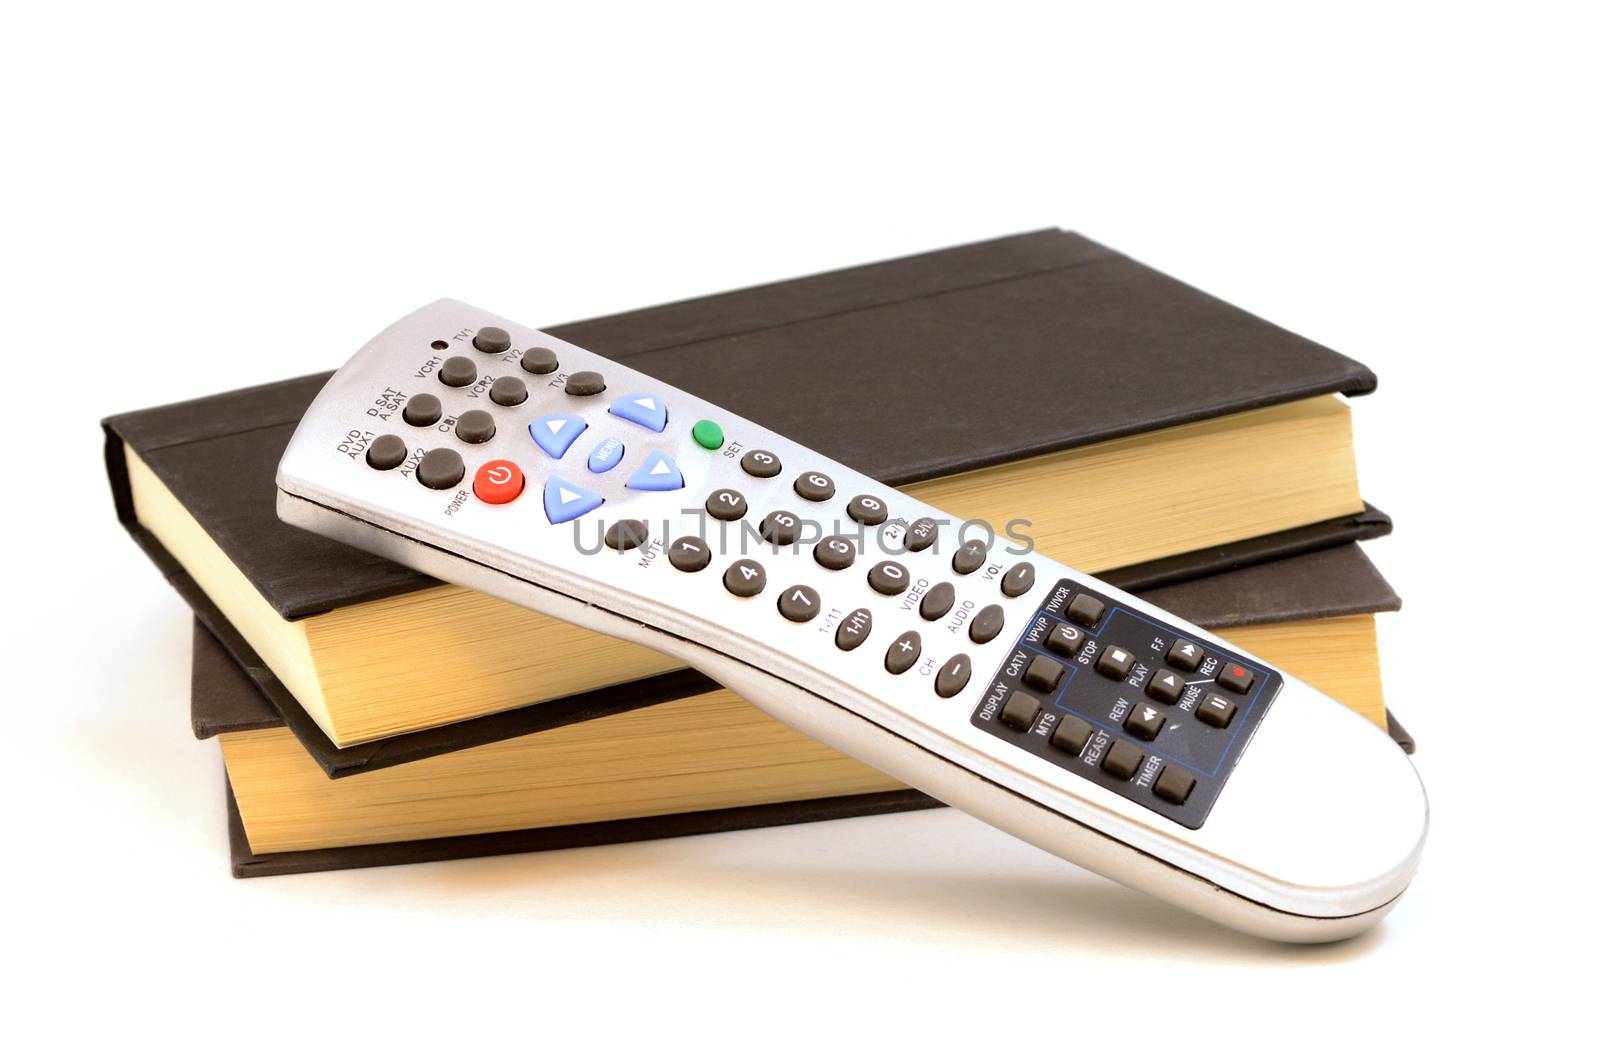 An isolated set of books and a universal remote to show that movies can come from books.